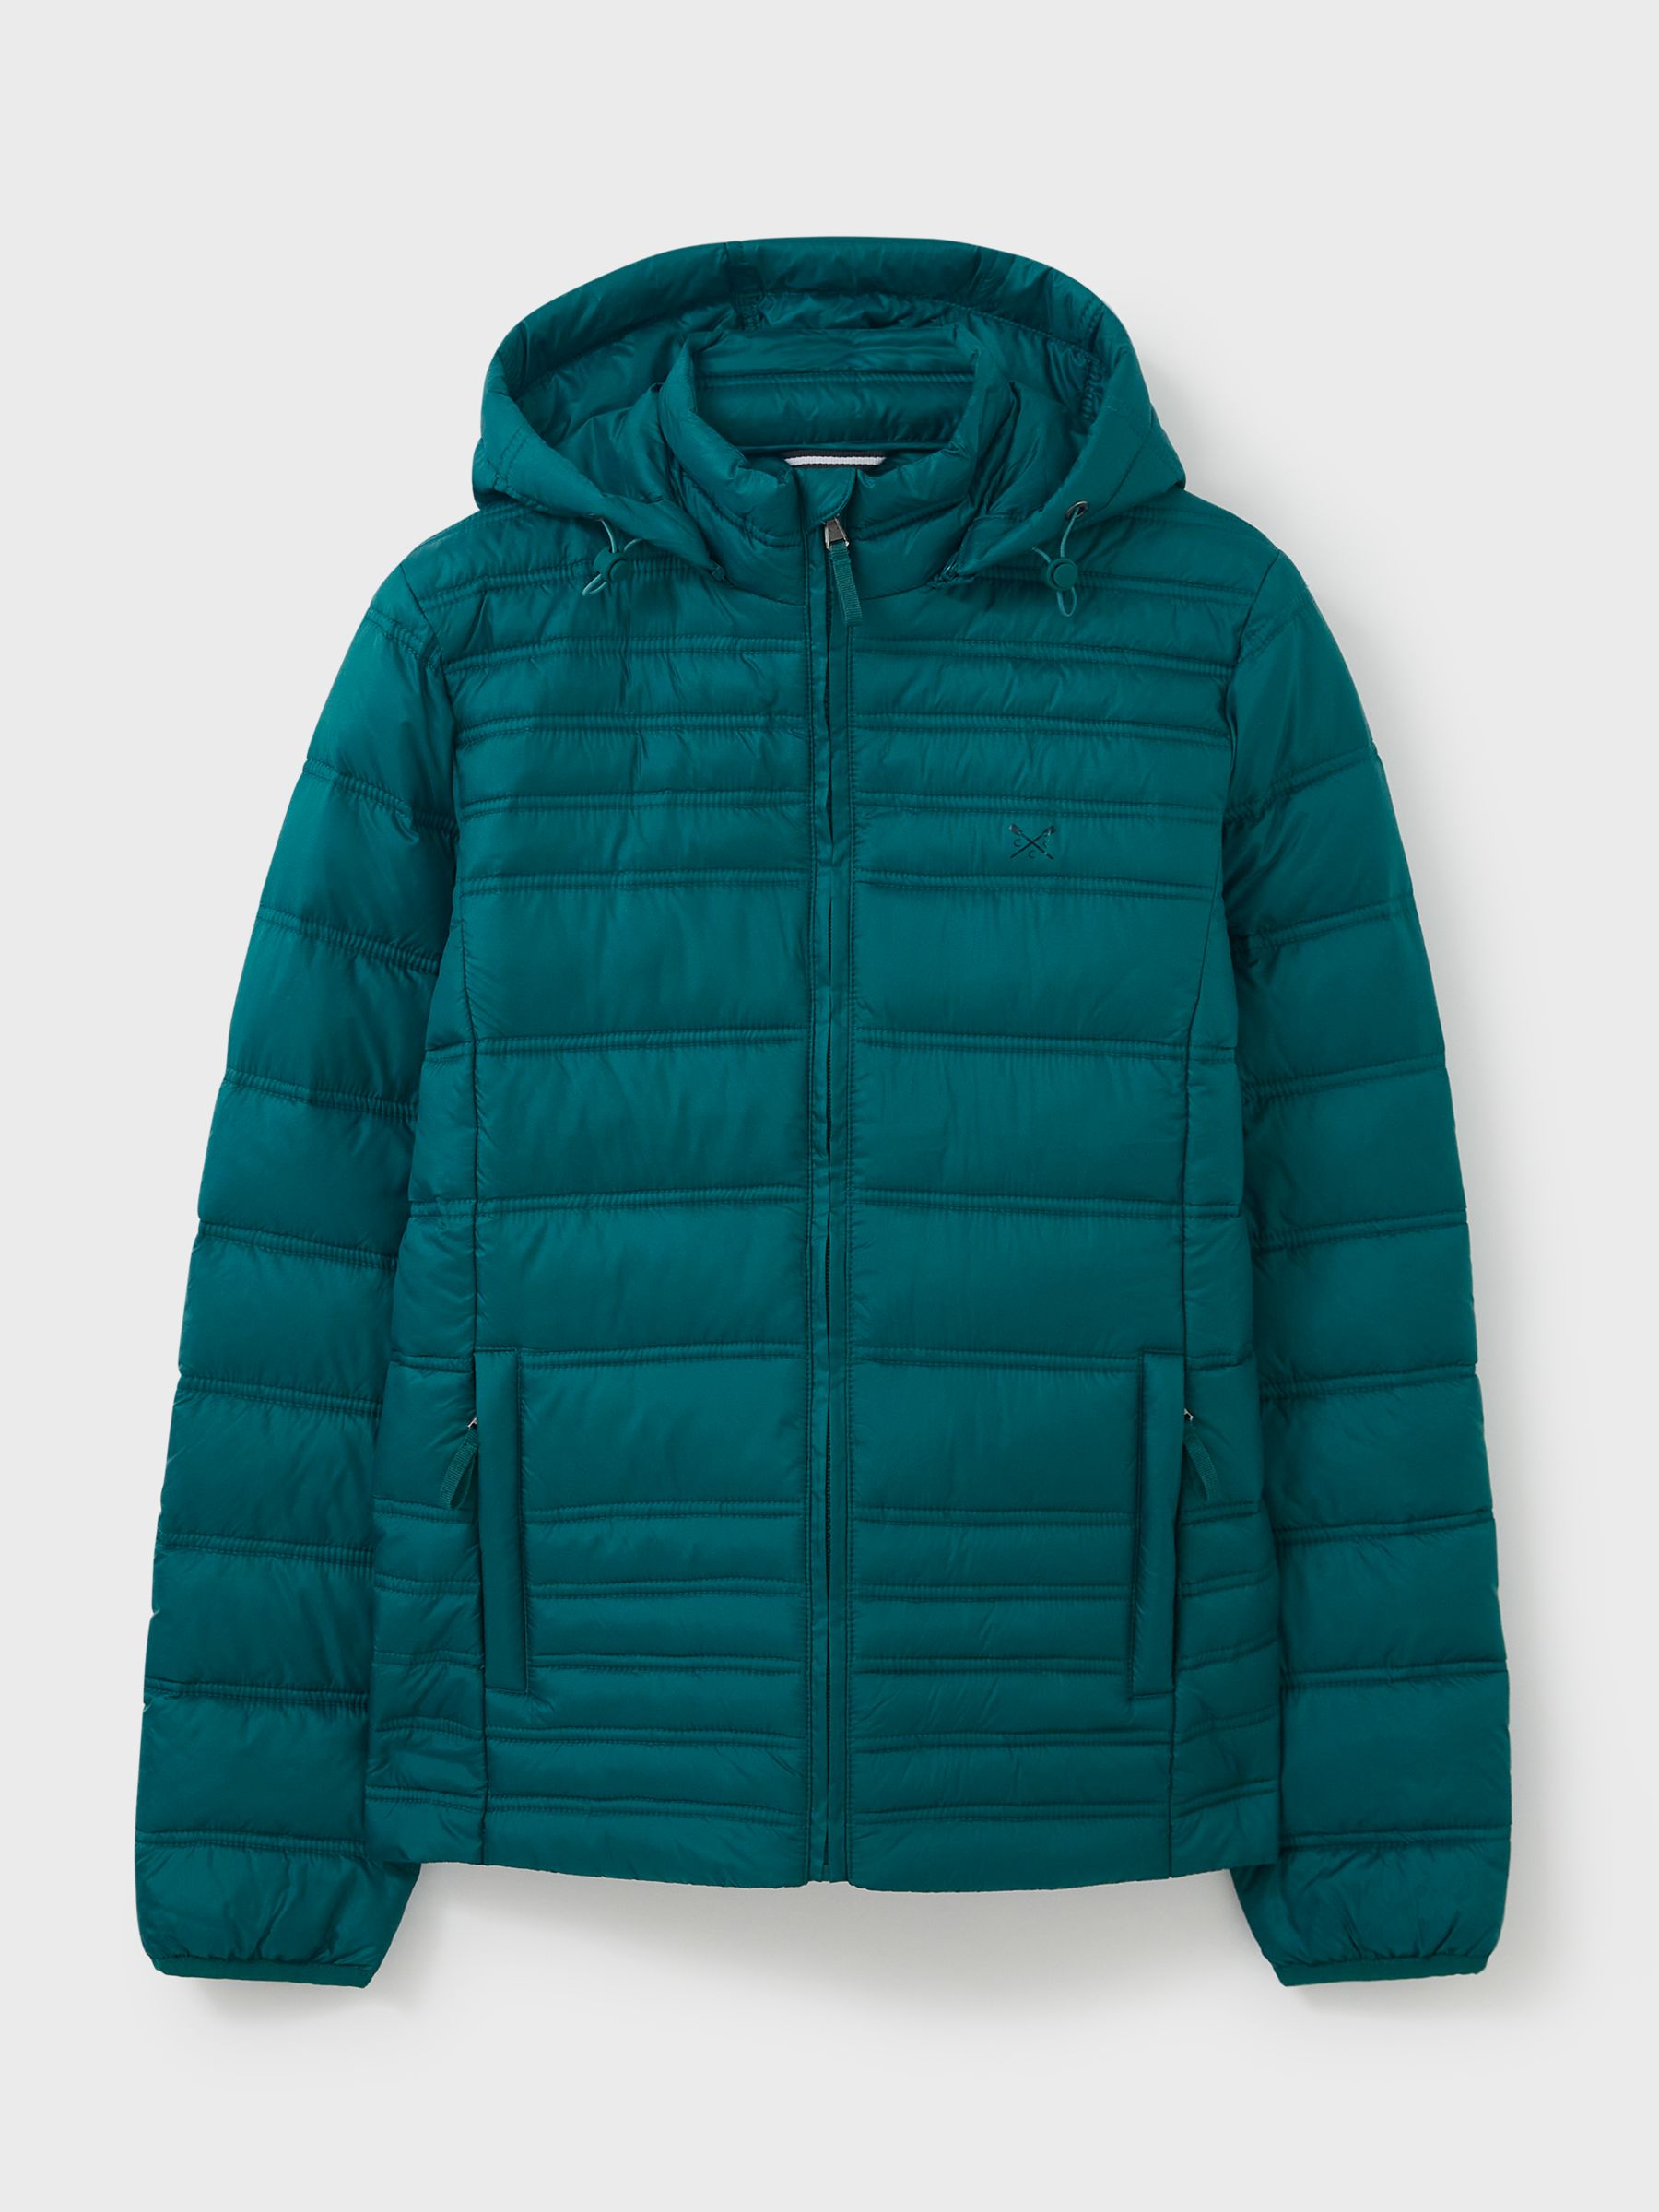 Crew Clothing Lightweight Padded Jacket, Teal Blue at John Lewis & Partners